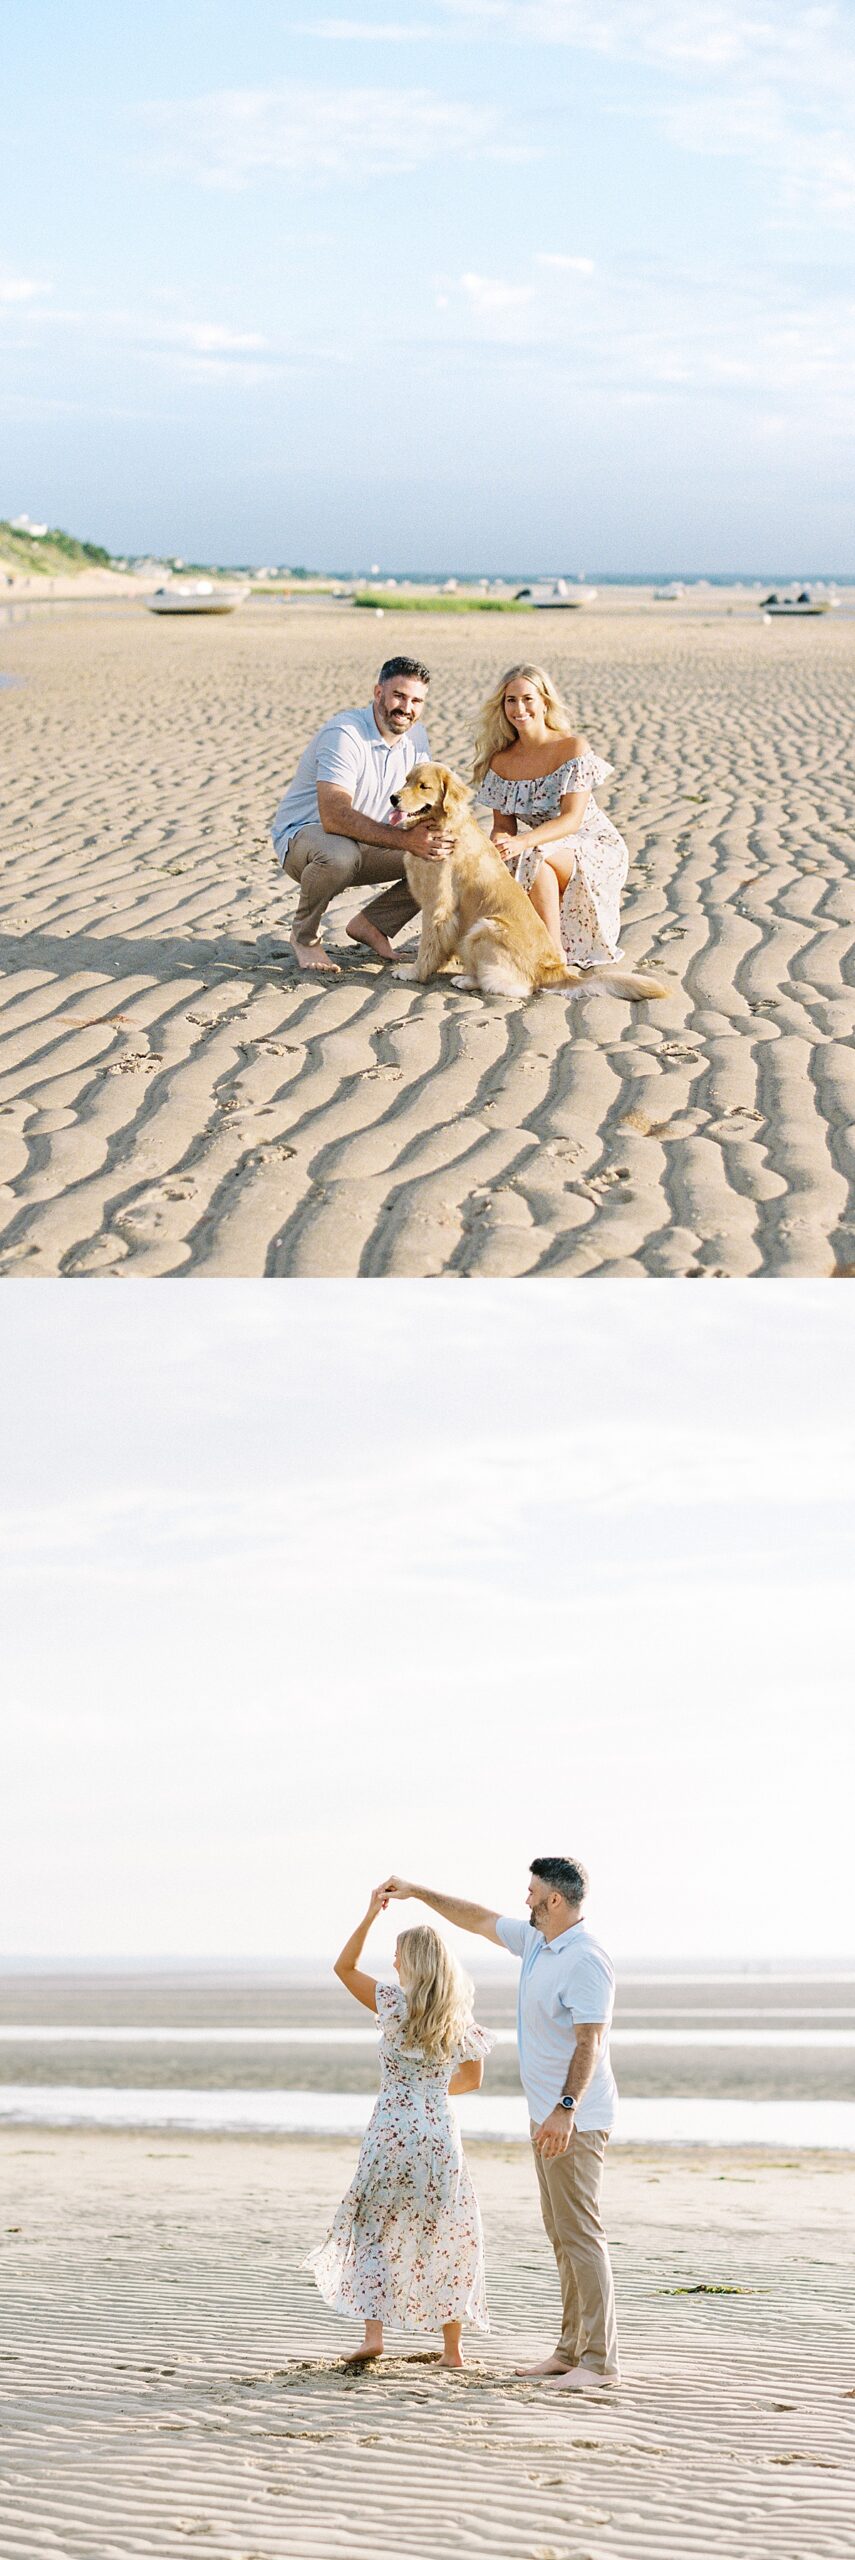 man spinning women on the beach during Cape Cod Engagement shoot